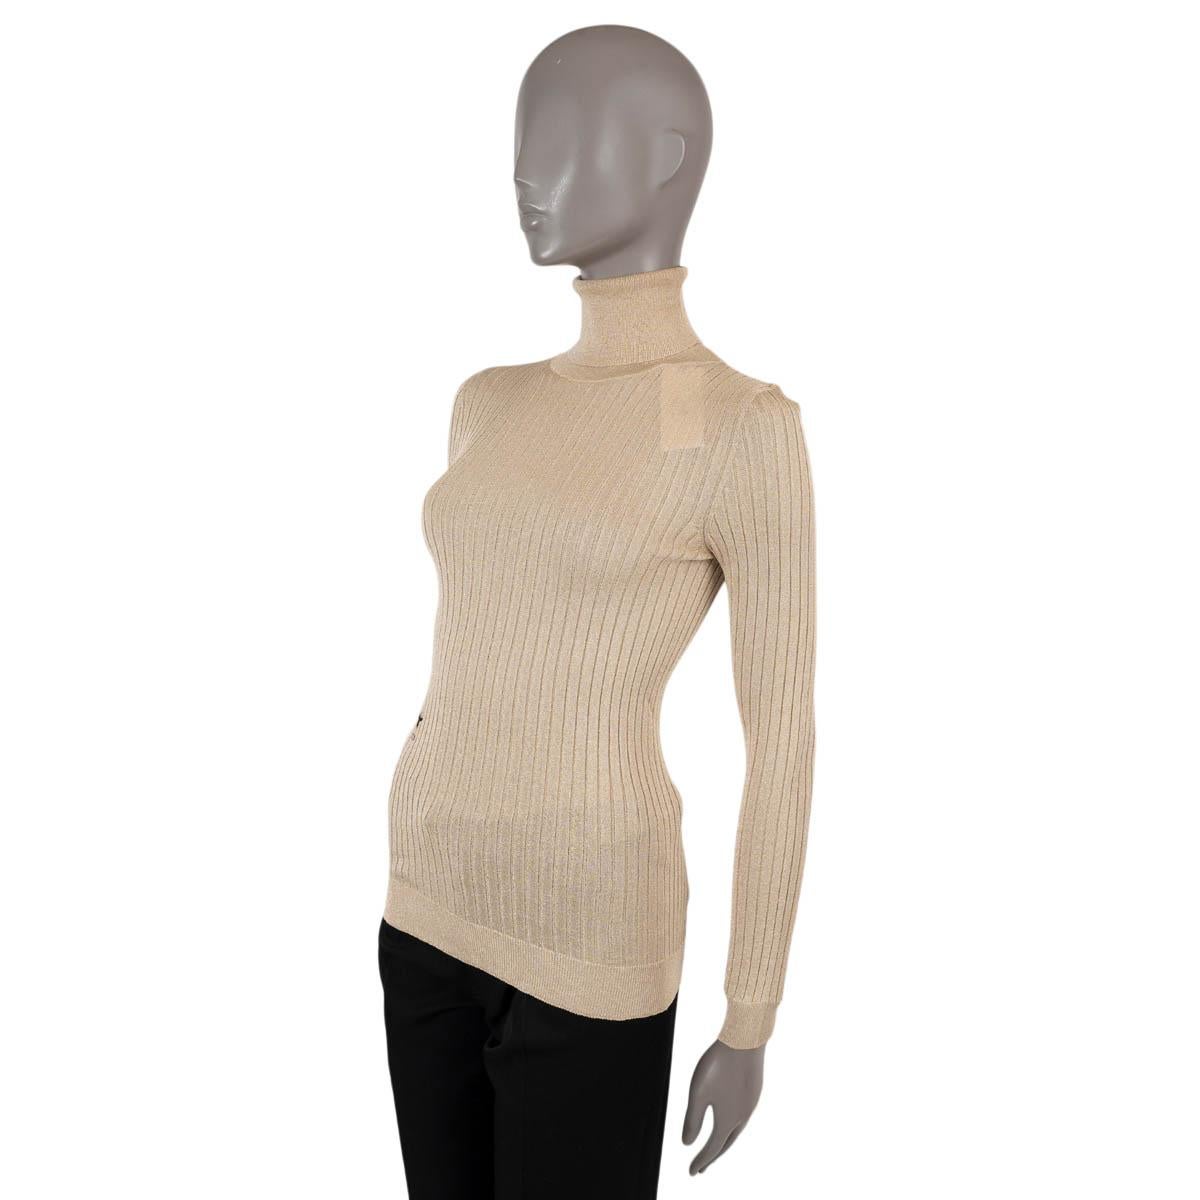 100% authentic Christian Dior rib-knit turtleneck sweater in beige viscose (80%) and metallic gold lurex polyester (20%) featuring black embroidered bee emblem. Has been worn and is in virtually new condition.

2019